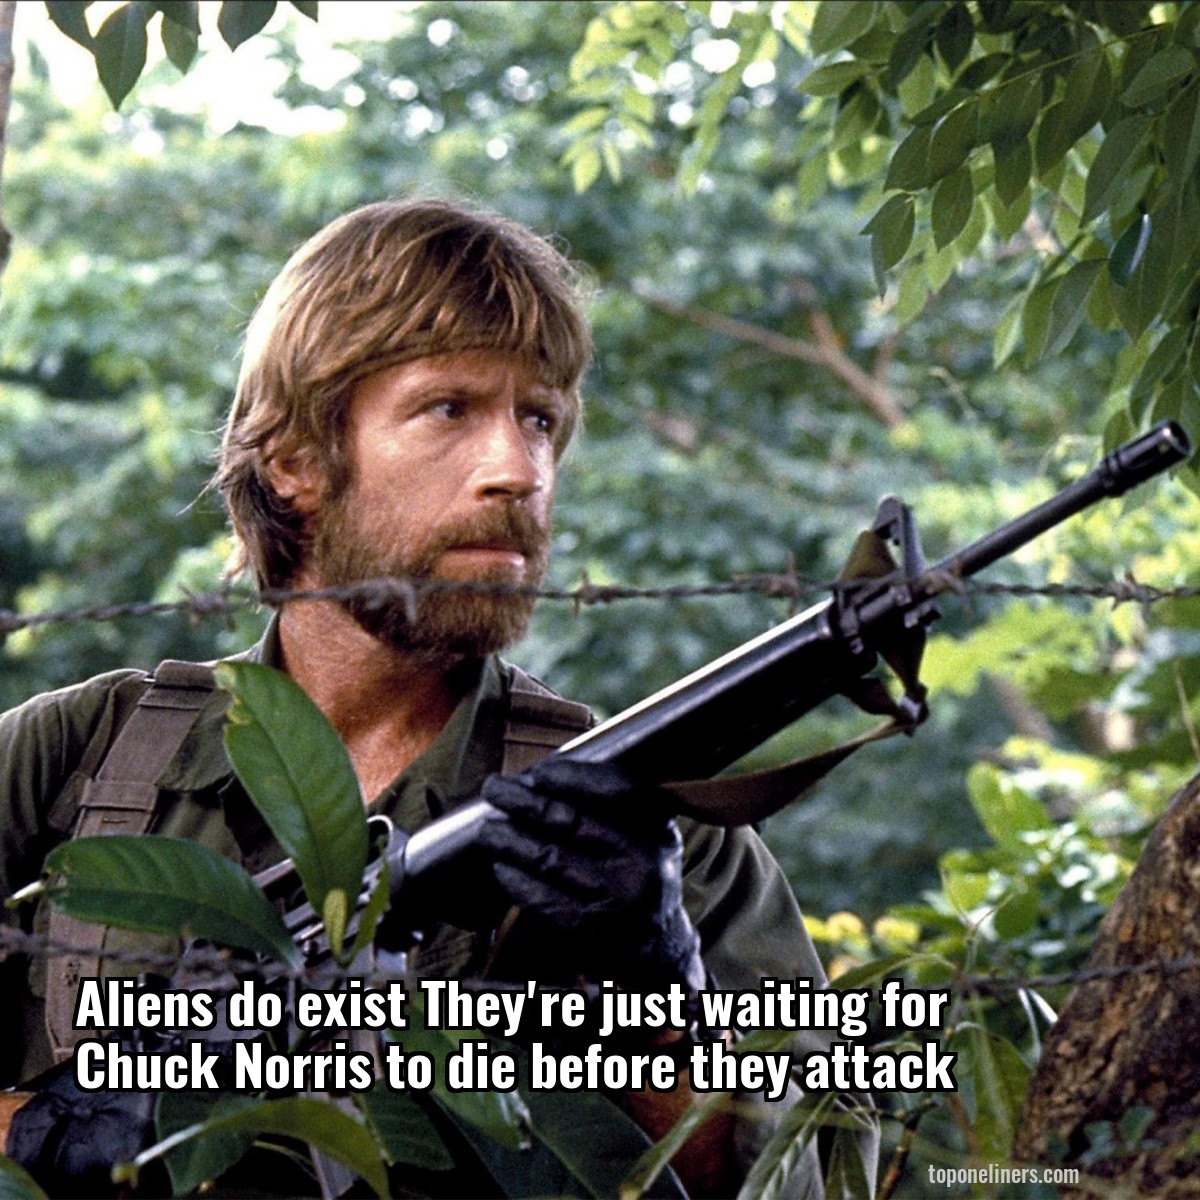 Aliens do exist They're just waiting for Chuck Norris to die before they attack